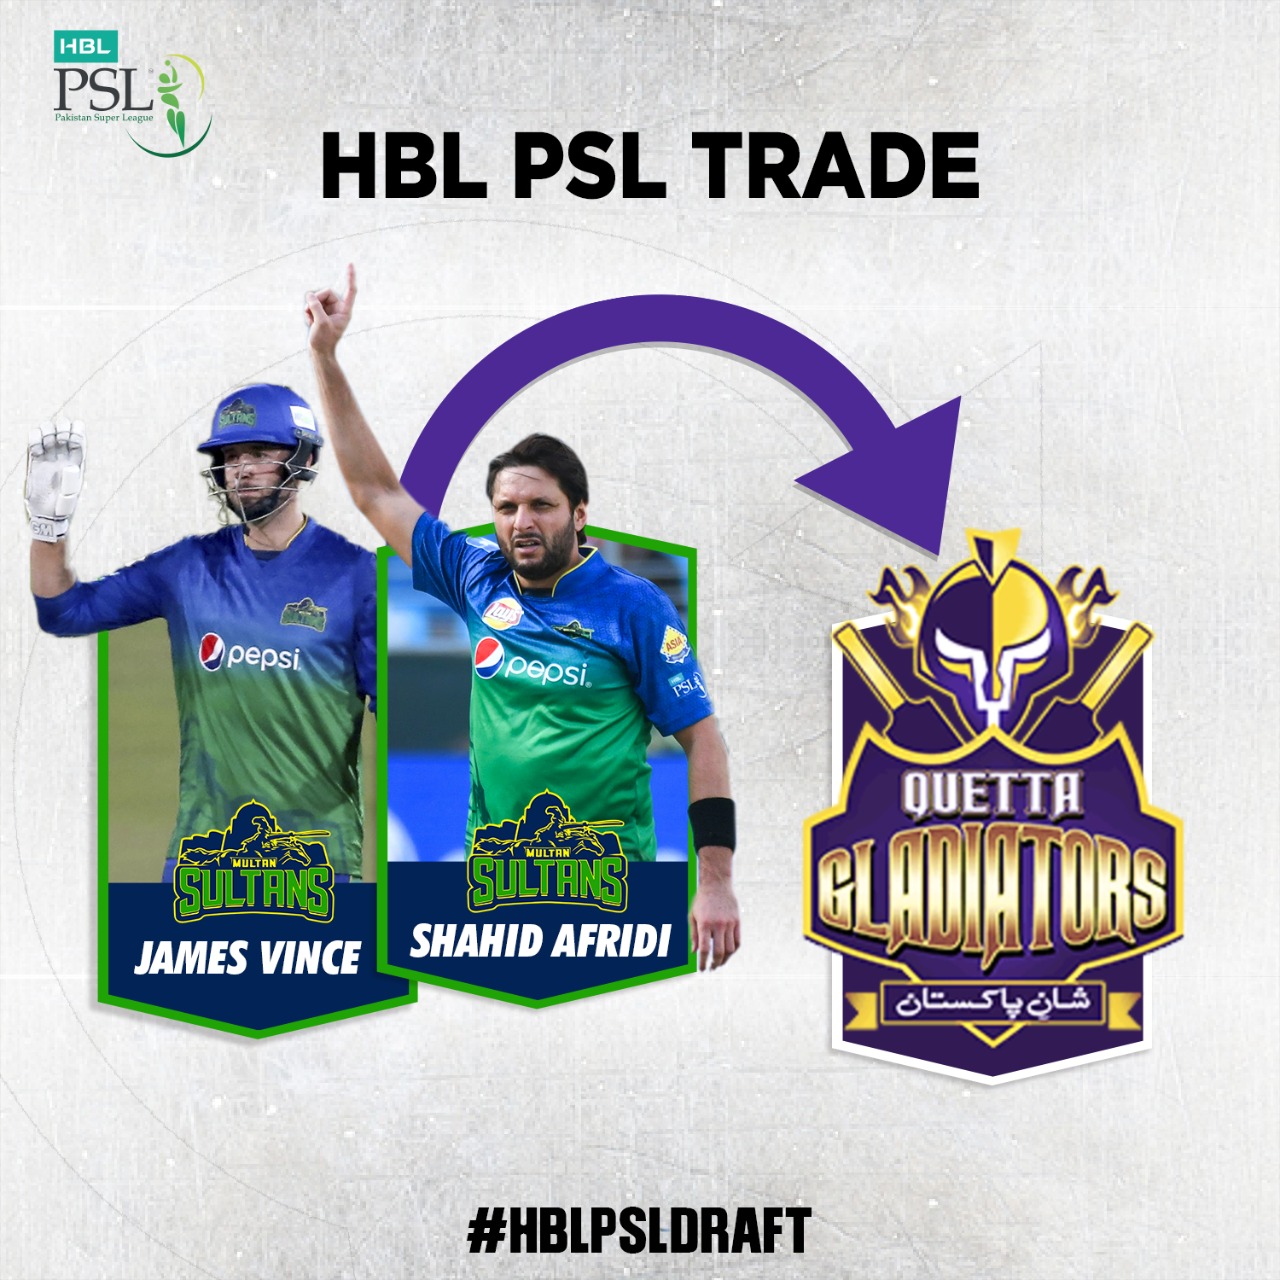 Shahid Afridi becomes a Gladiator for HBL PSL 7 Press Release PCB